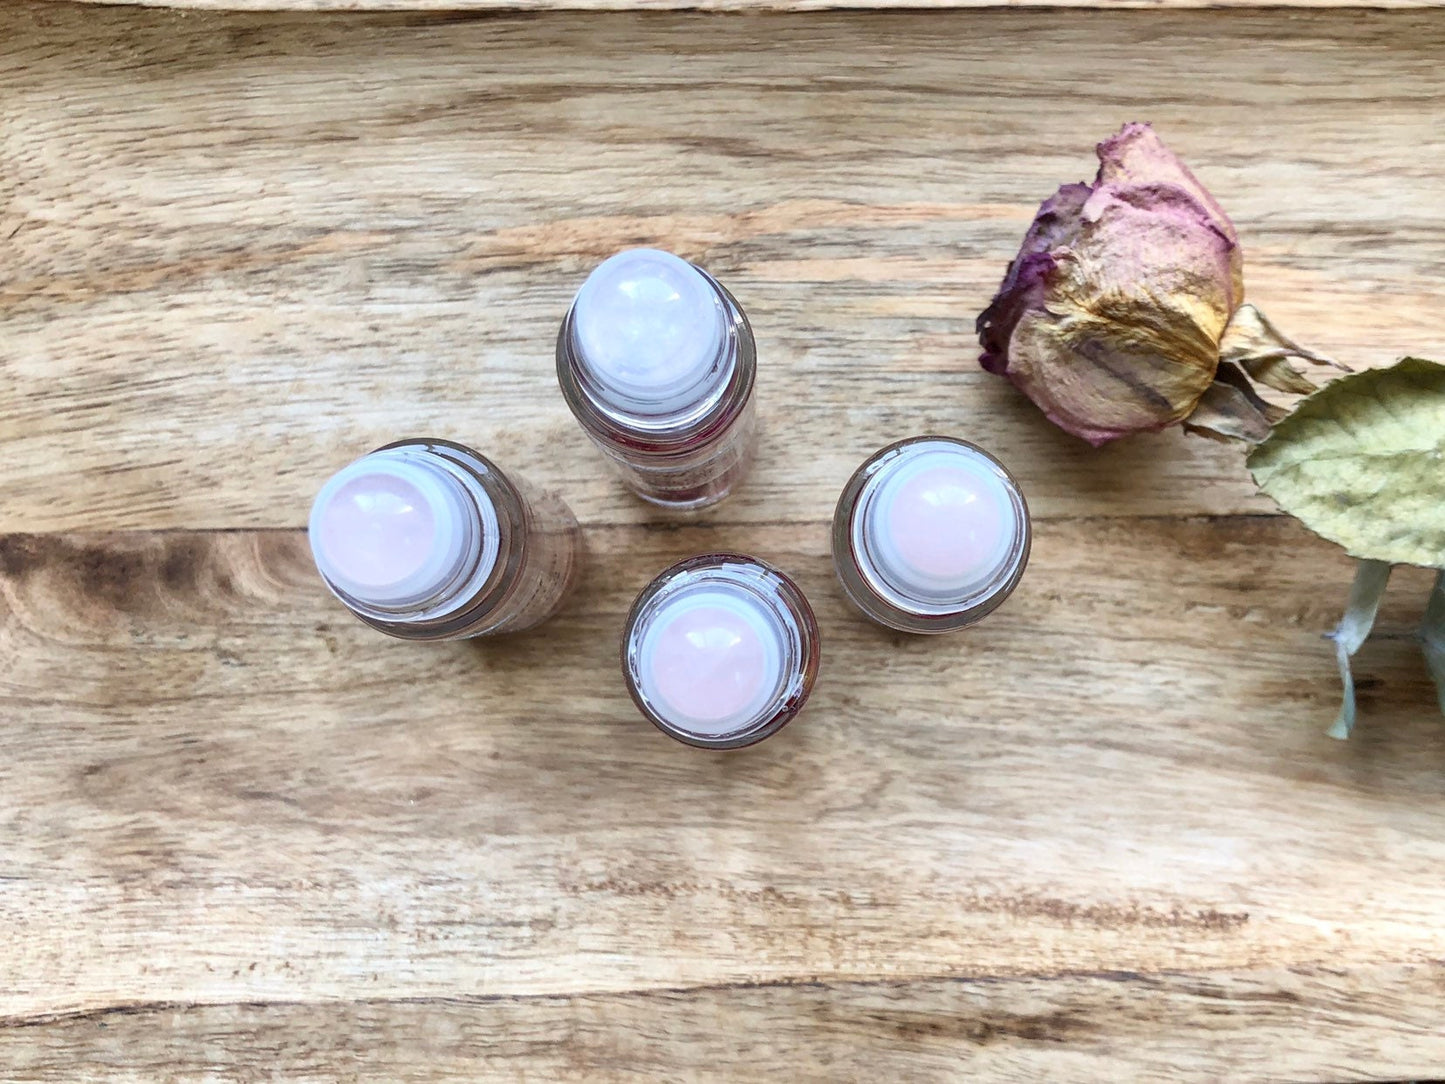 Crystalline "Heart and Soul" Essential Oil Roller - Rose Quartz and Ylang Ylang